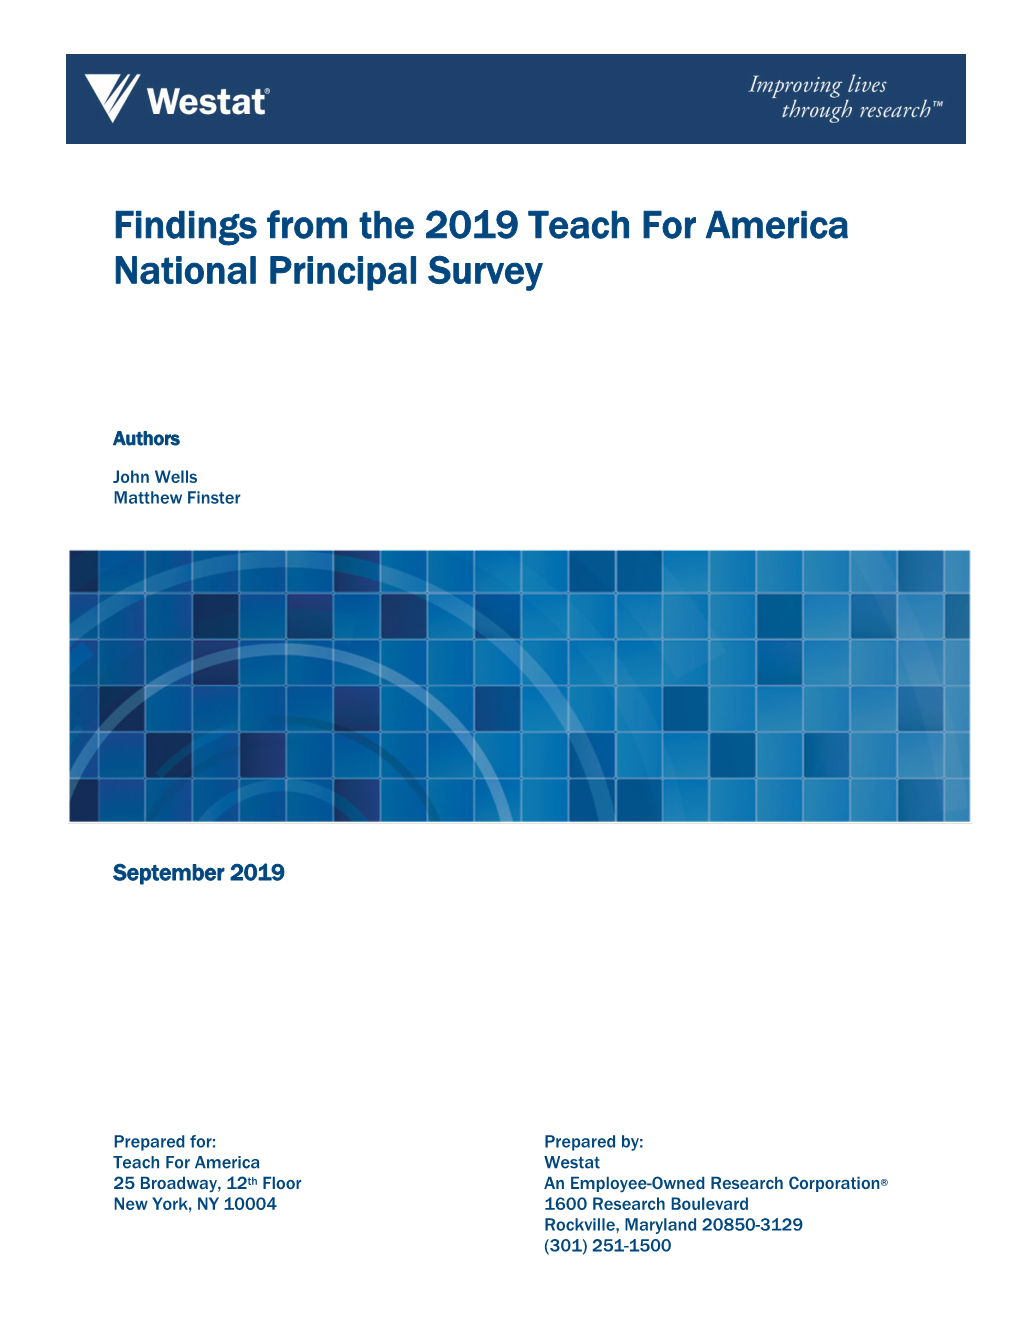 Findings from the 2019 Teach for America National Principal Survey